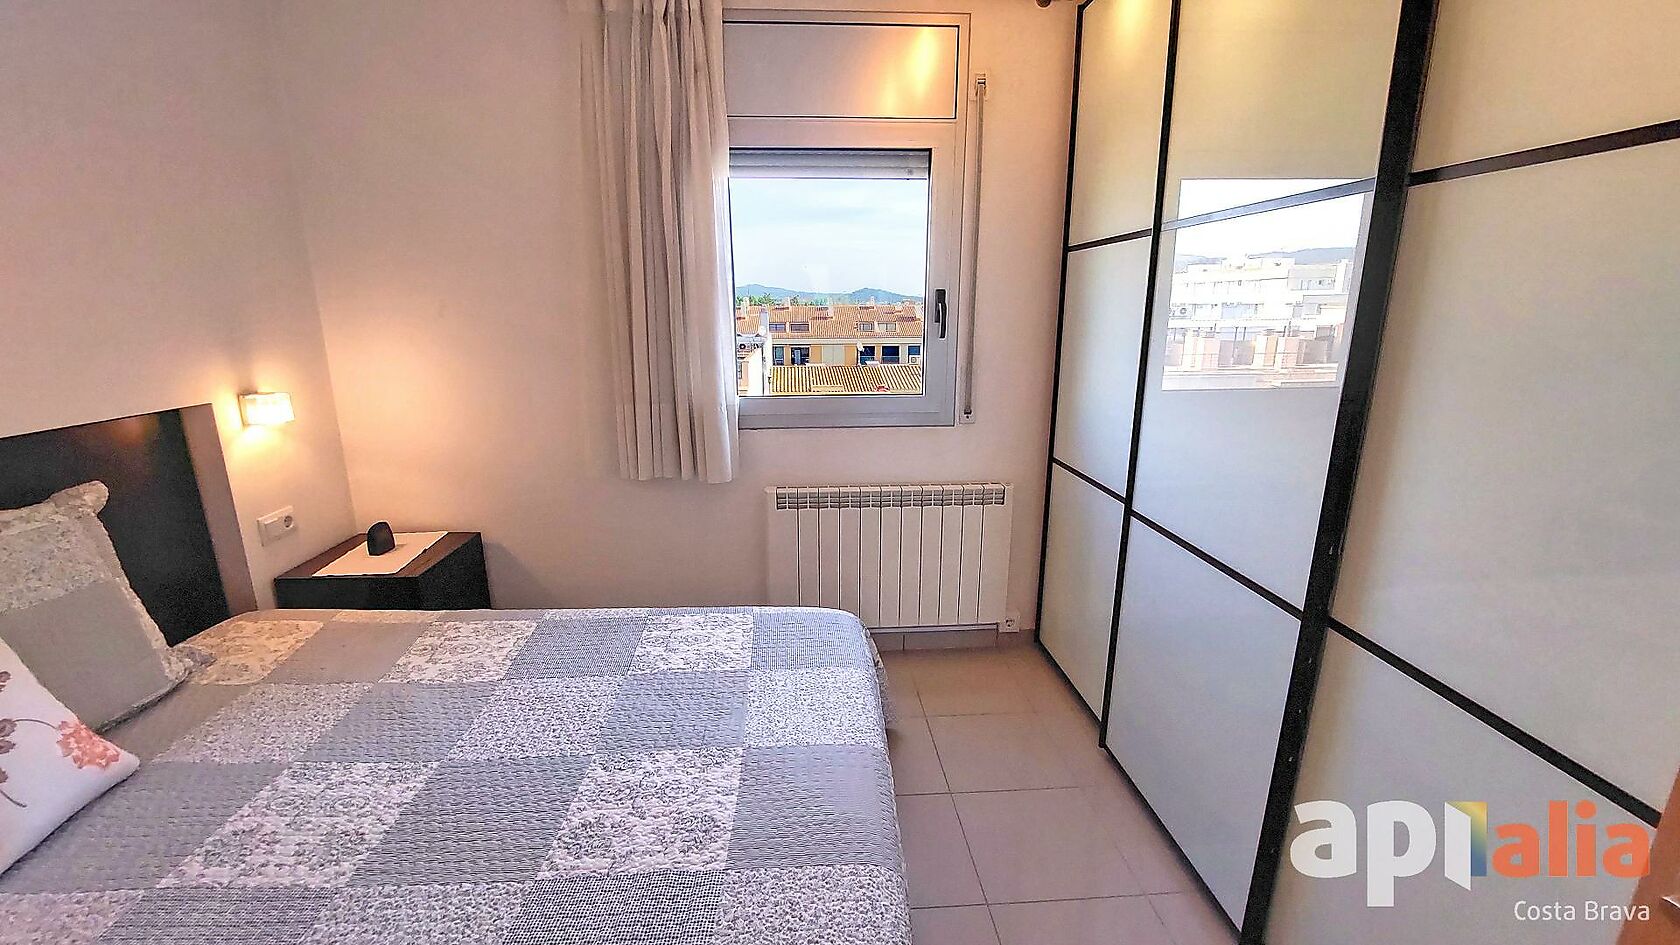 Apartment with sea views in Palamós